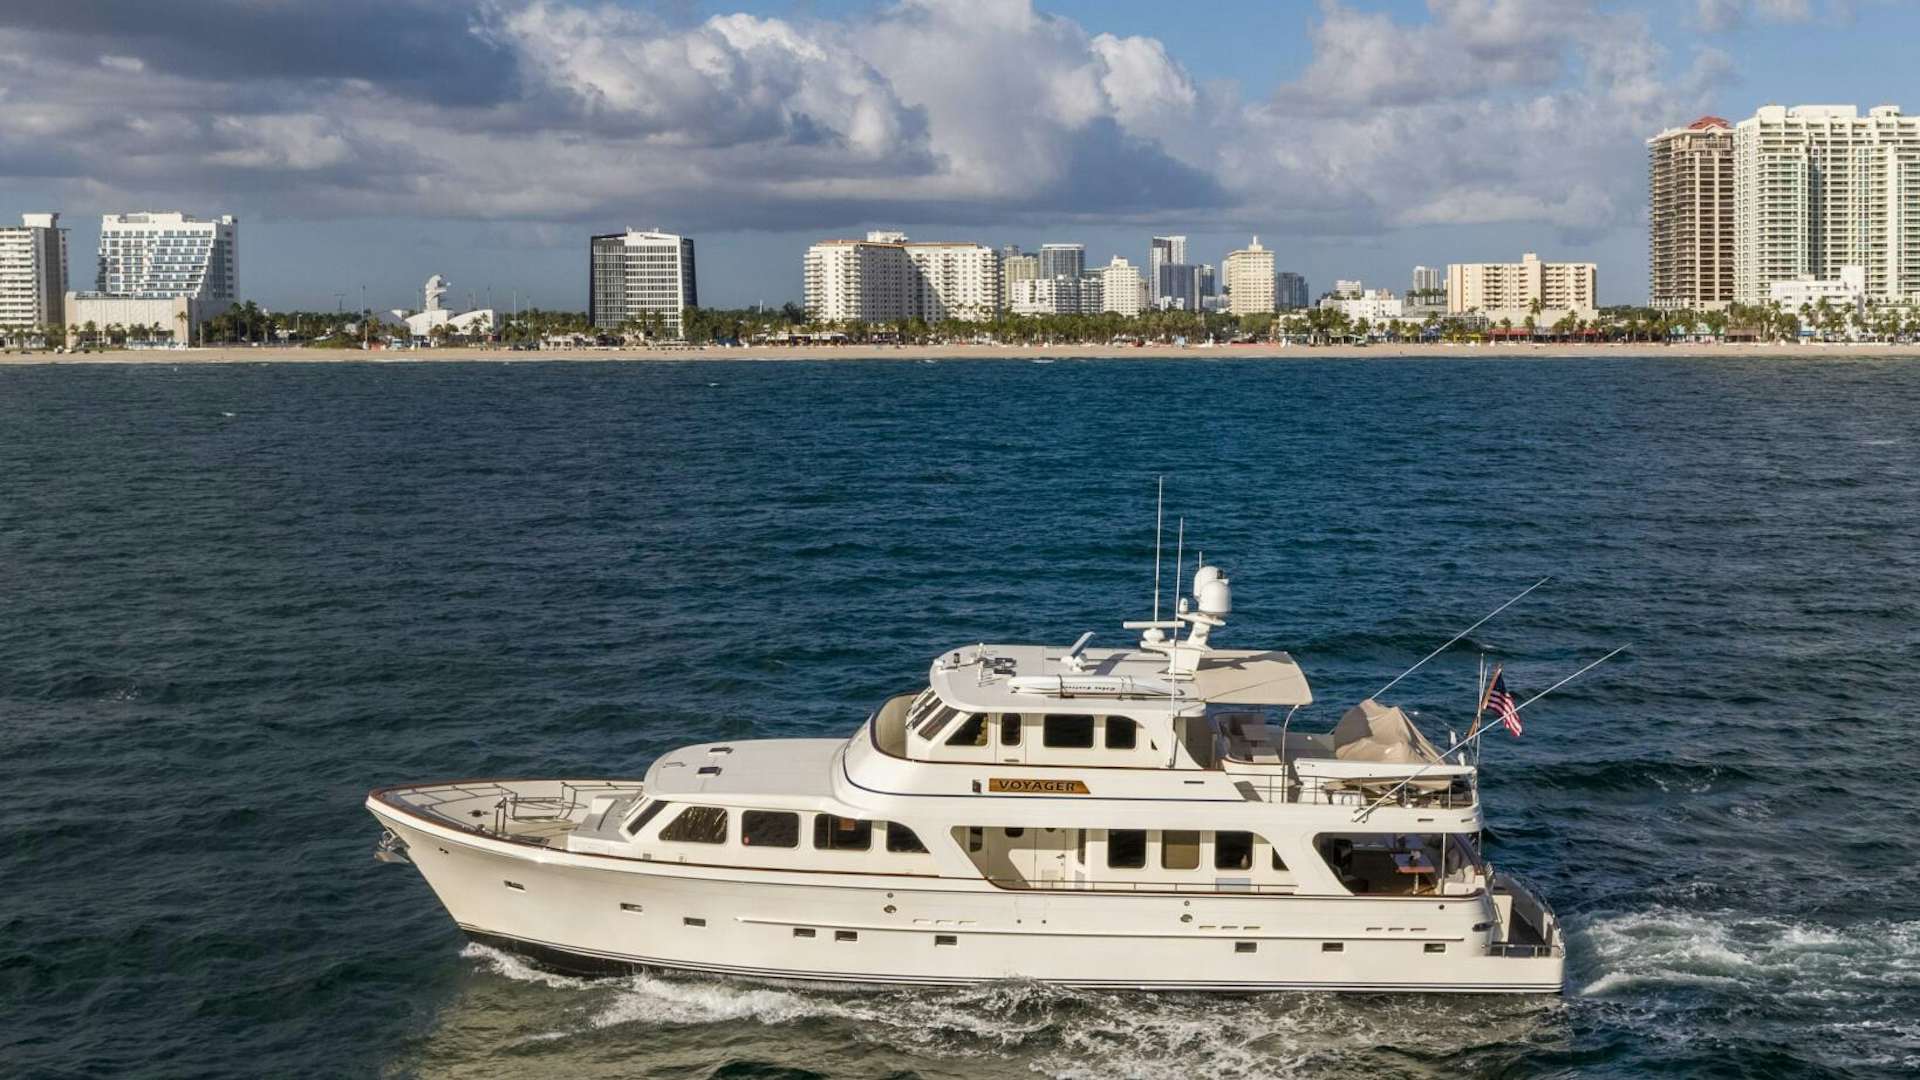 Voyager
Yacht for Sale